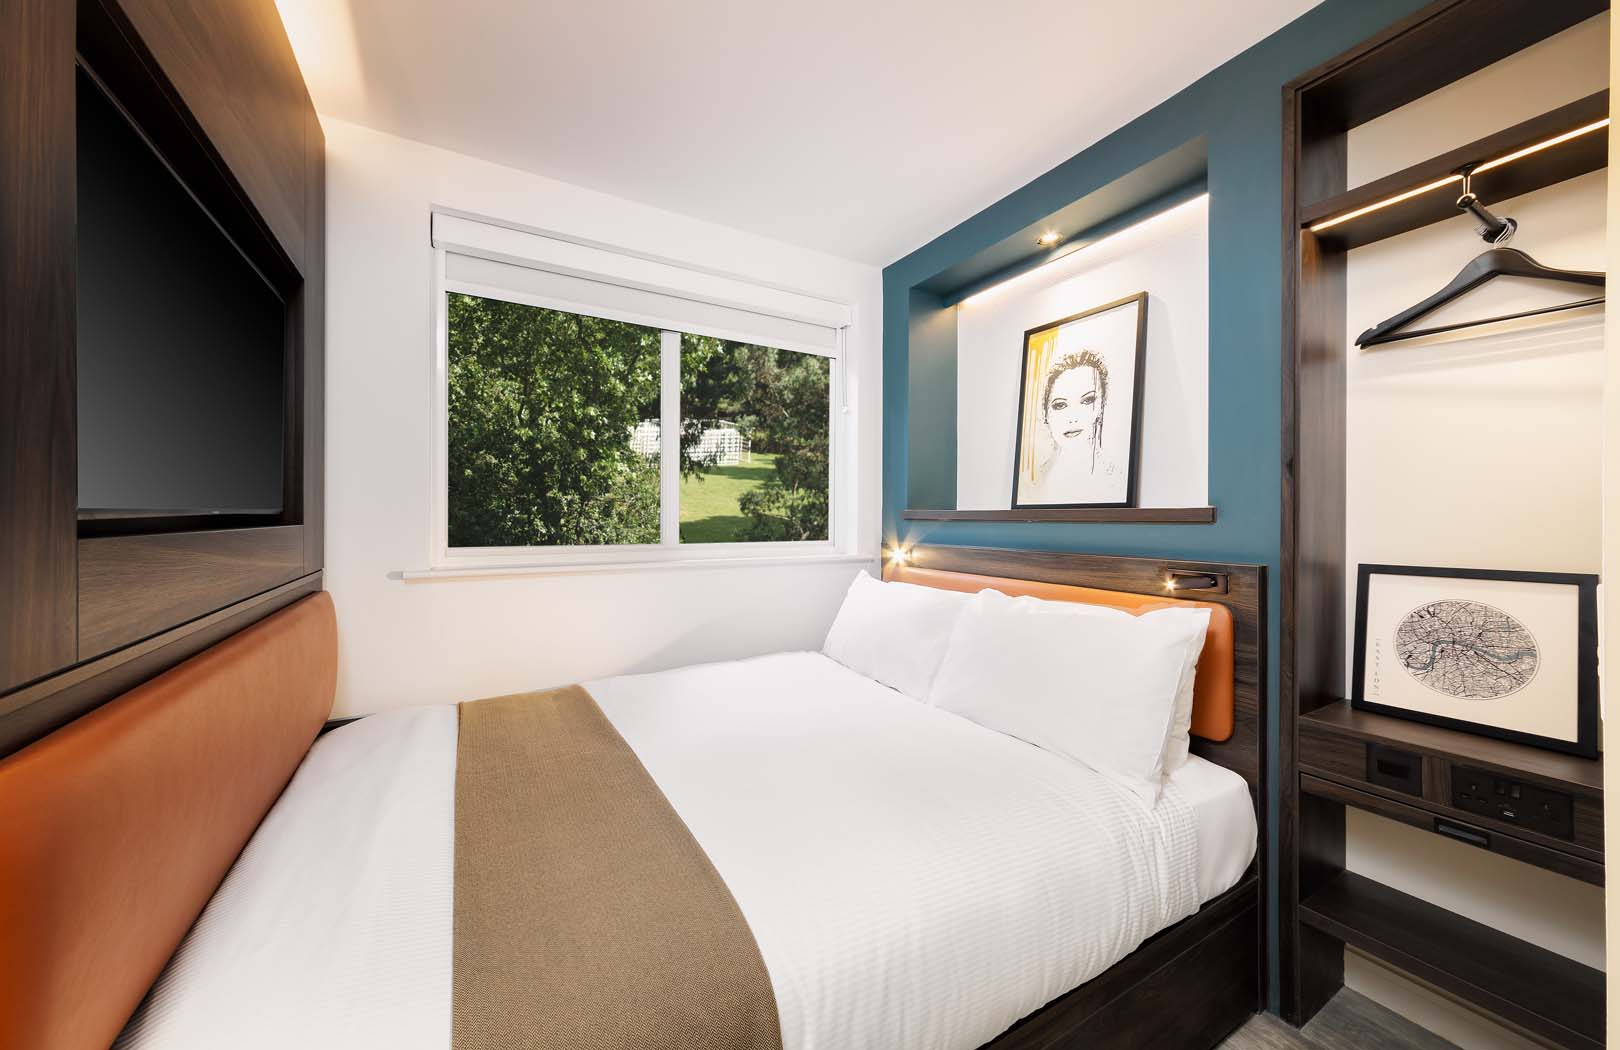 The East London Hotel's Double bed and TV